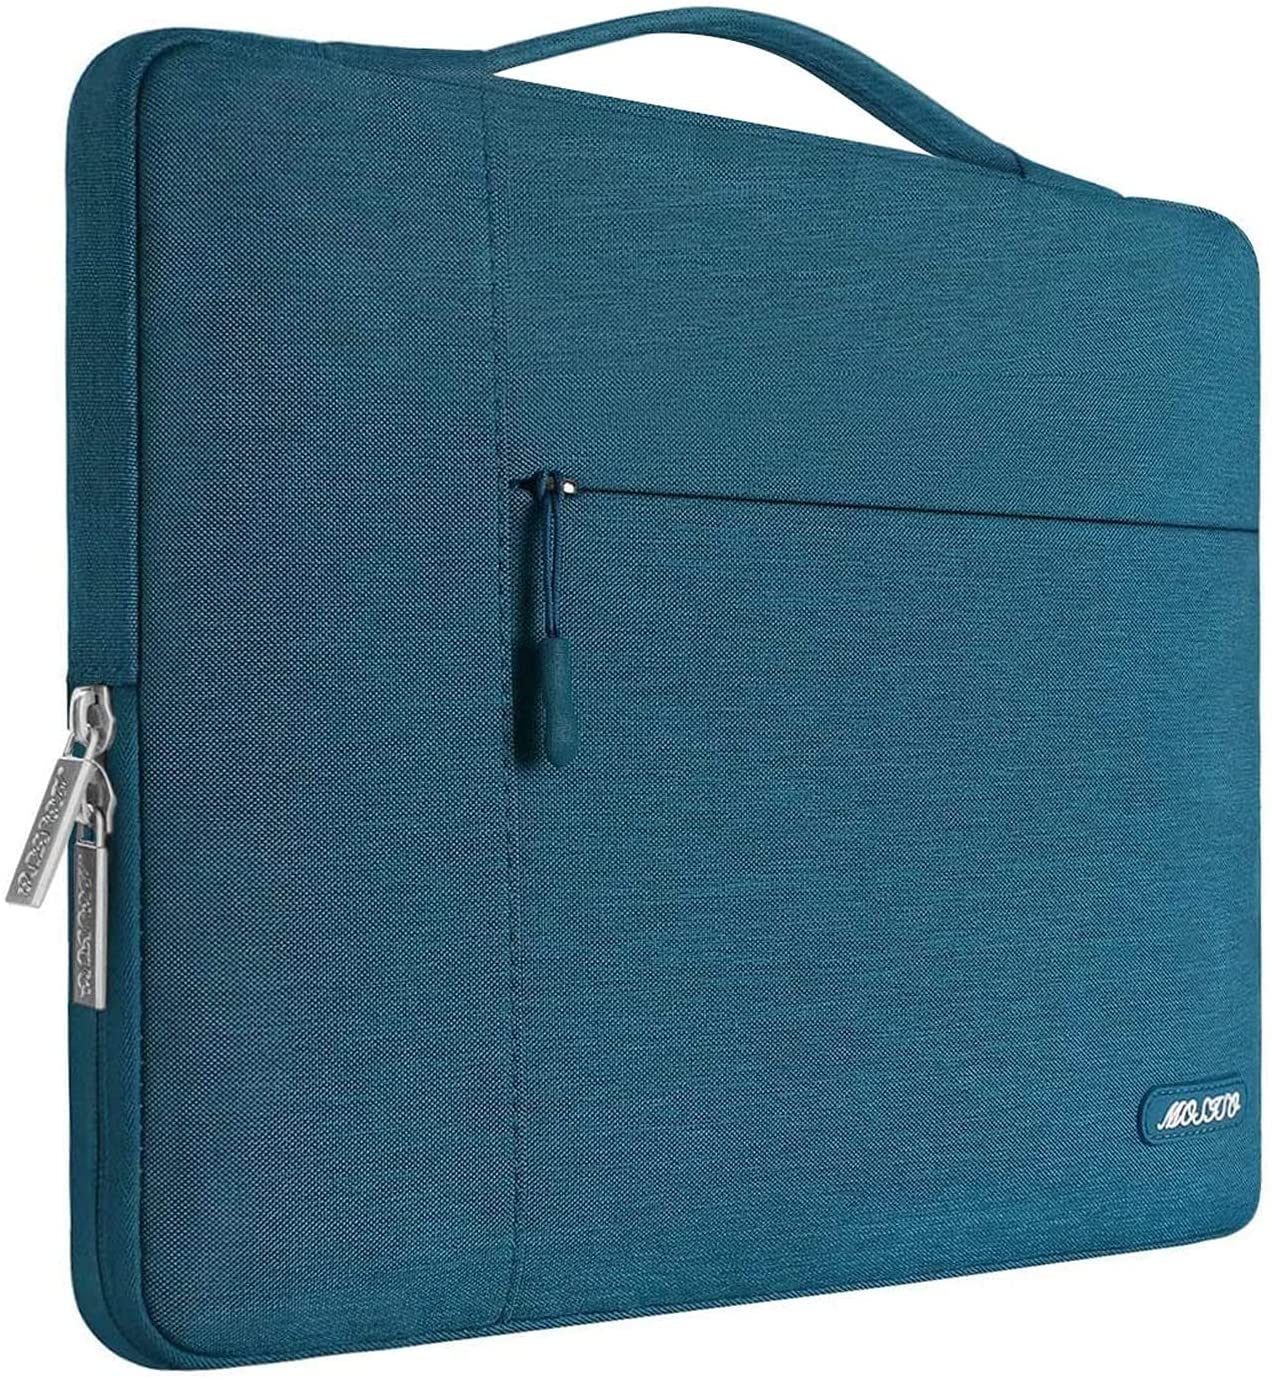 Laptop Sleeve for Newest 15 Inch MacBook Air & 16 Inch MacBook Pro